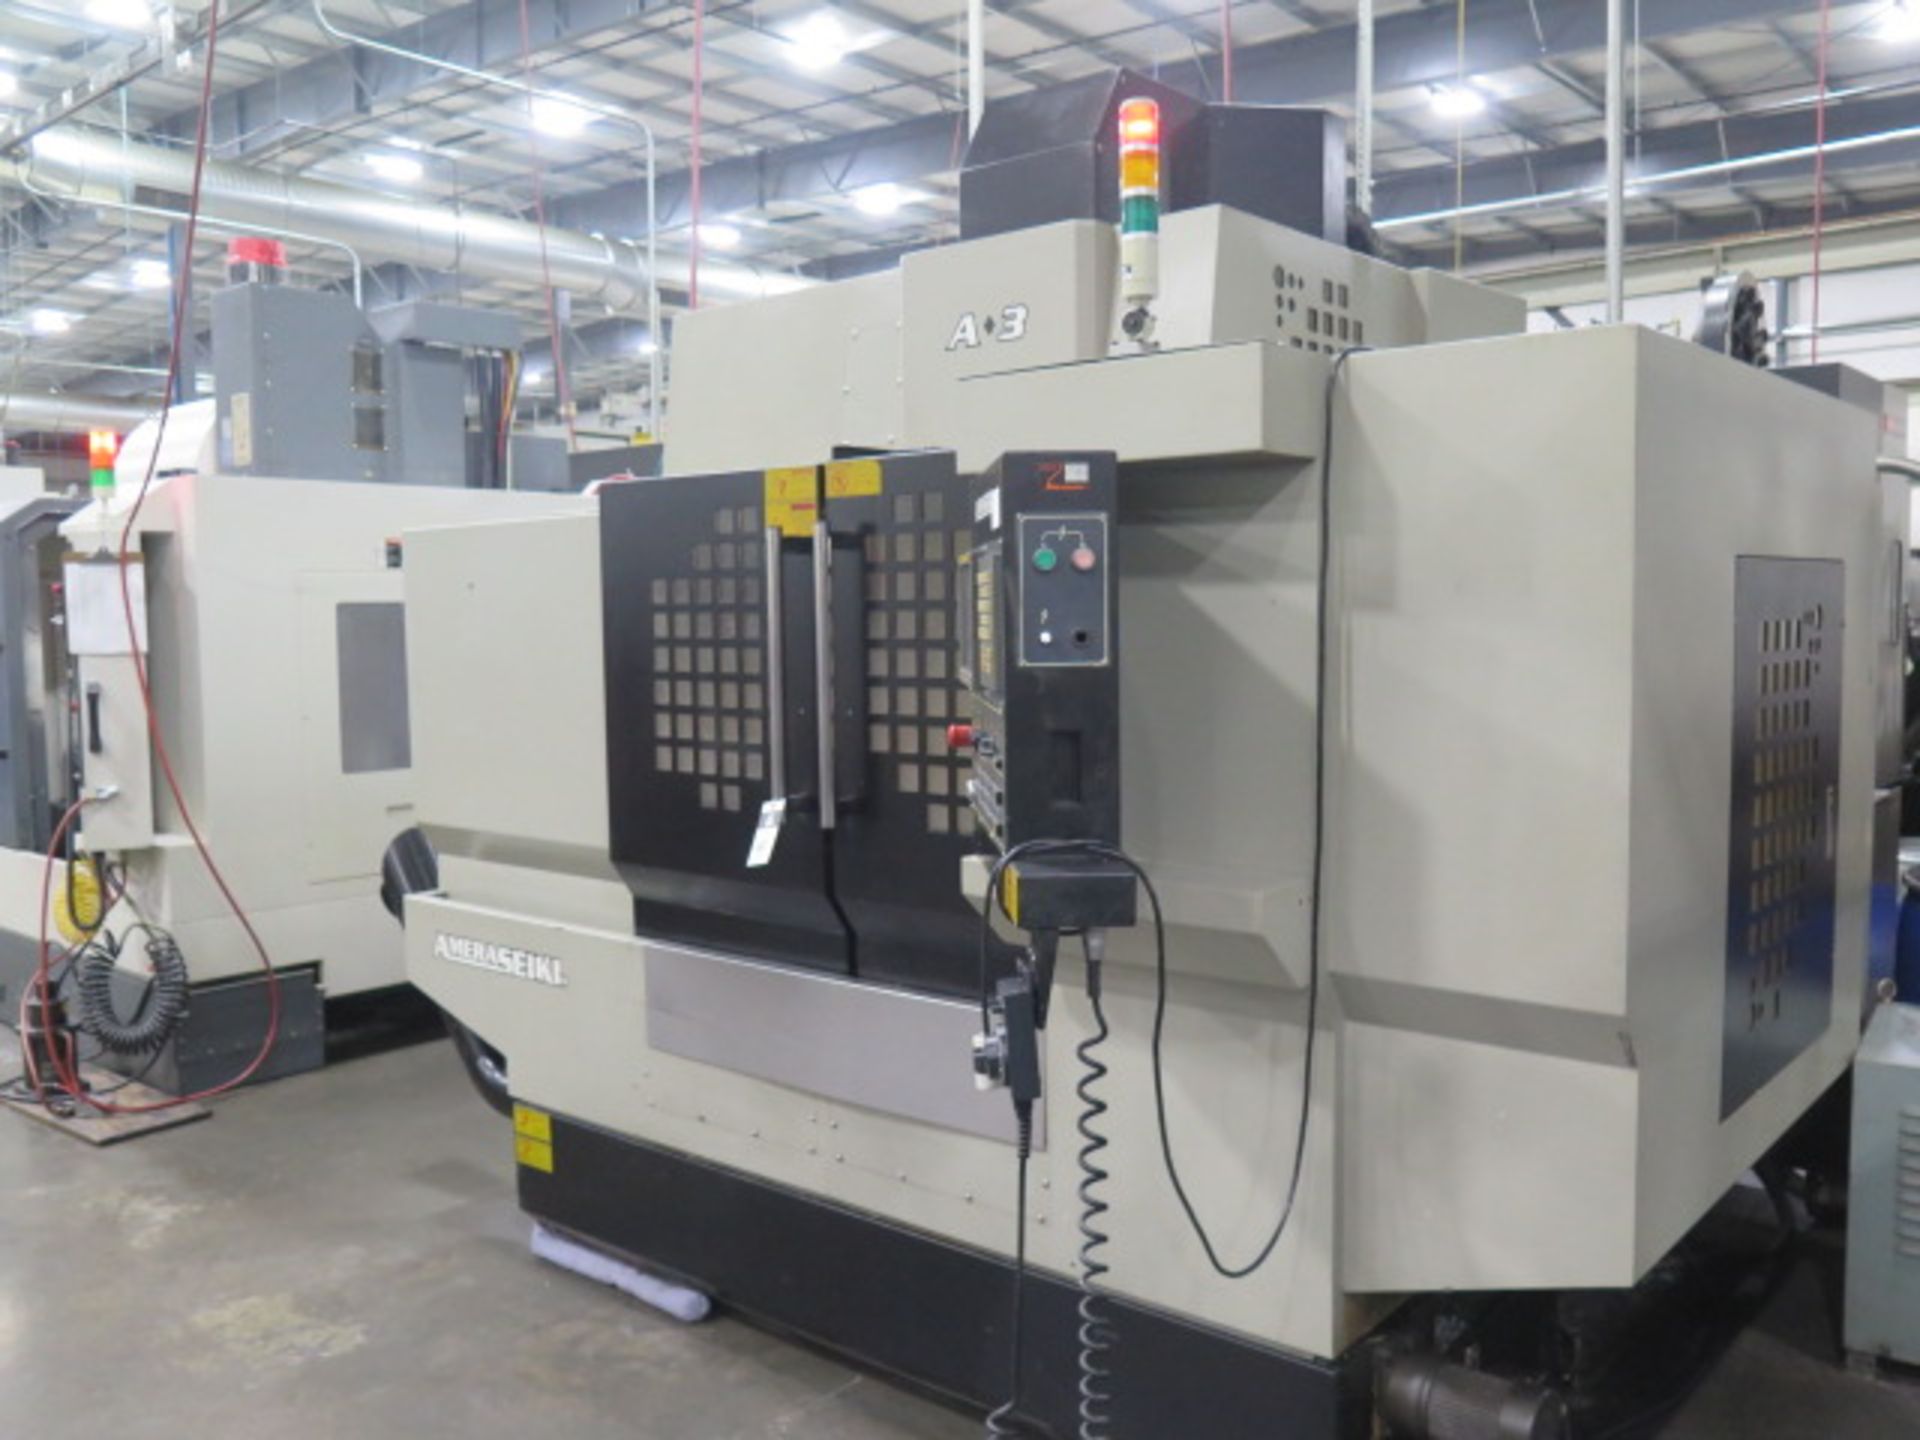 Amera Seiki A-3 CNC Vertical Machining Center w/ Fanuc Series 21i-MB Controls, SOLD AS IS - Image 3 of 16